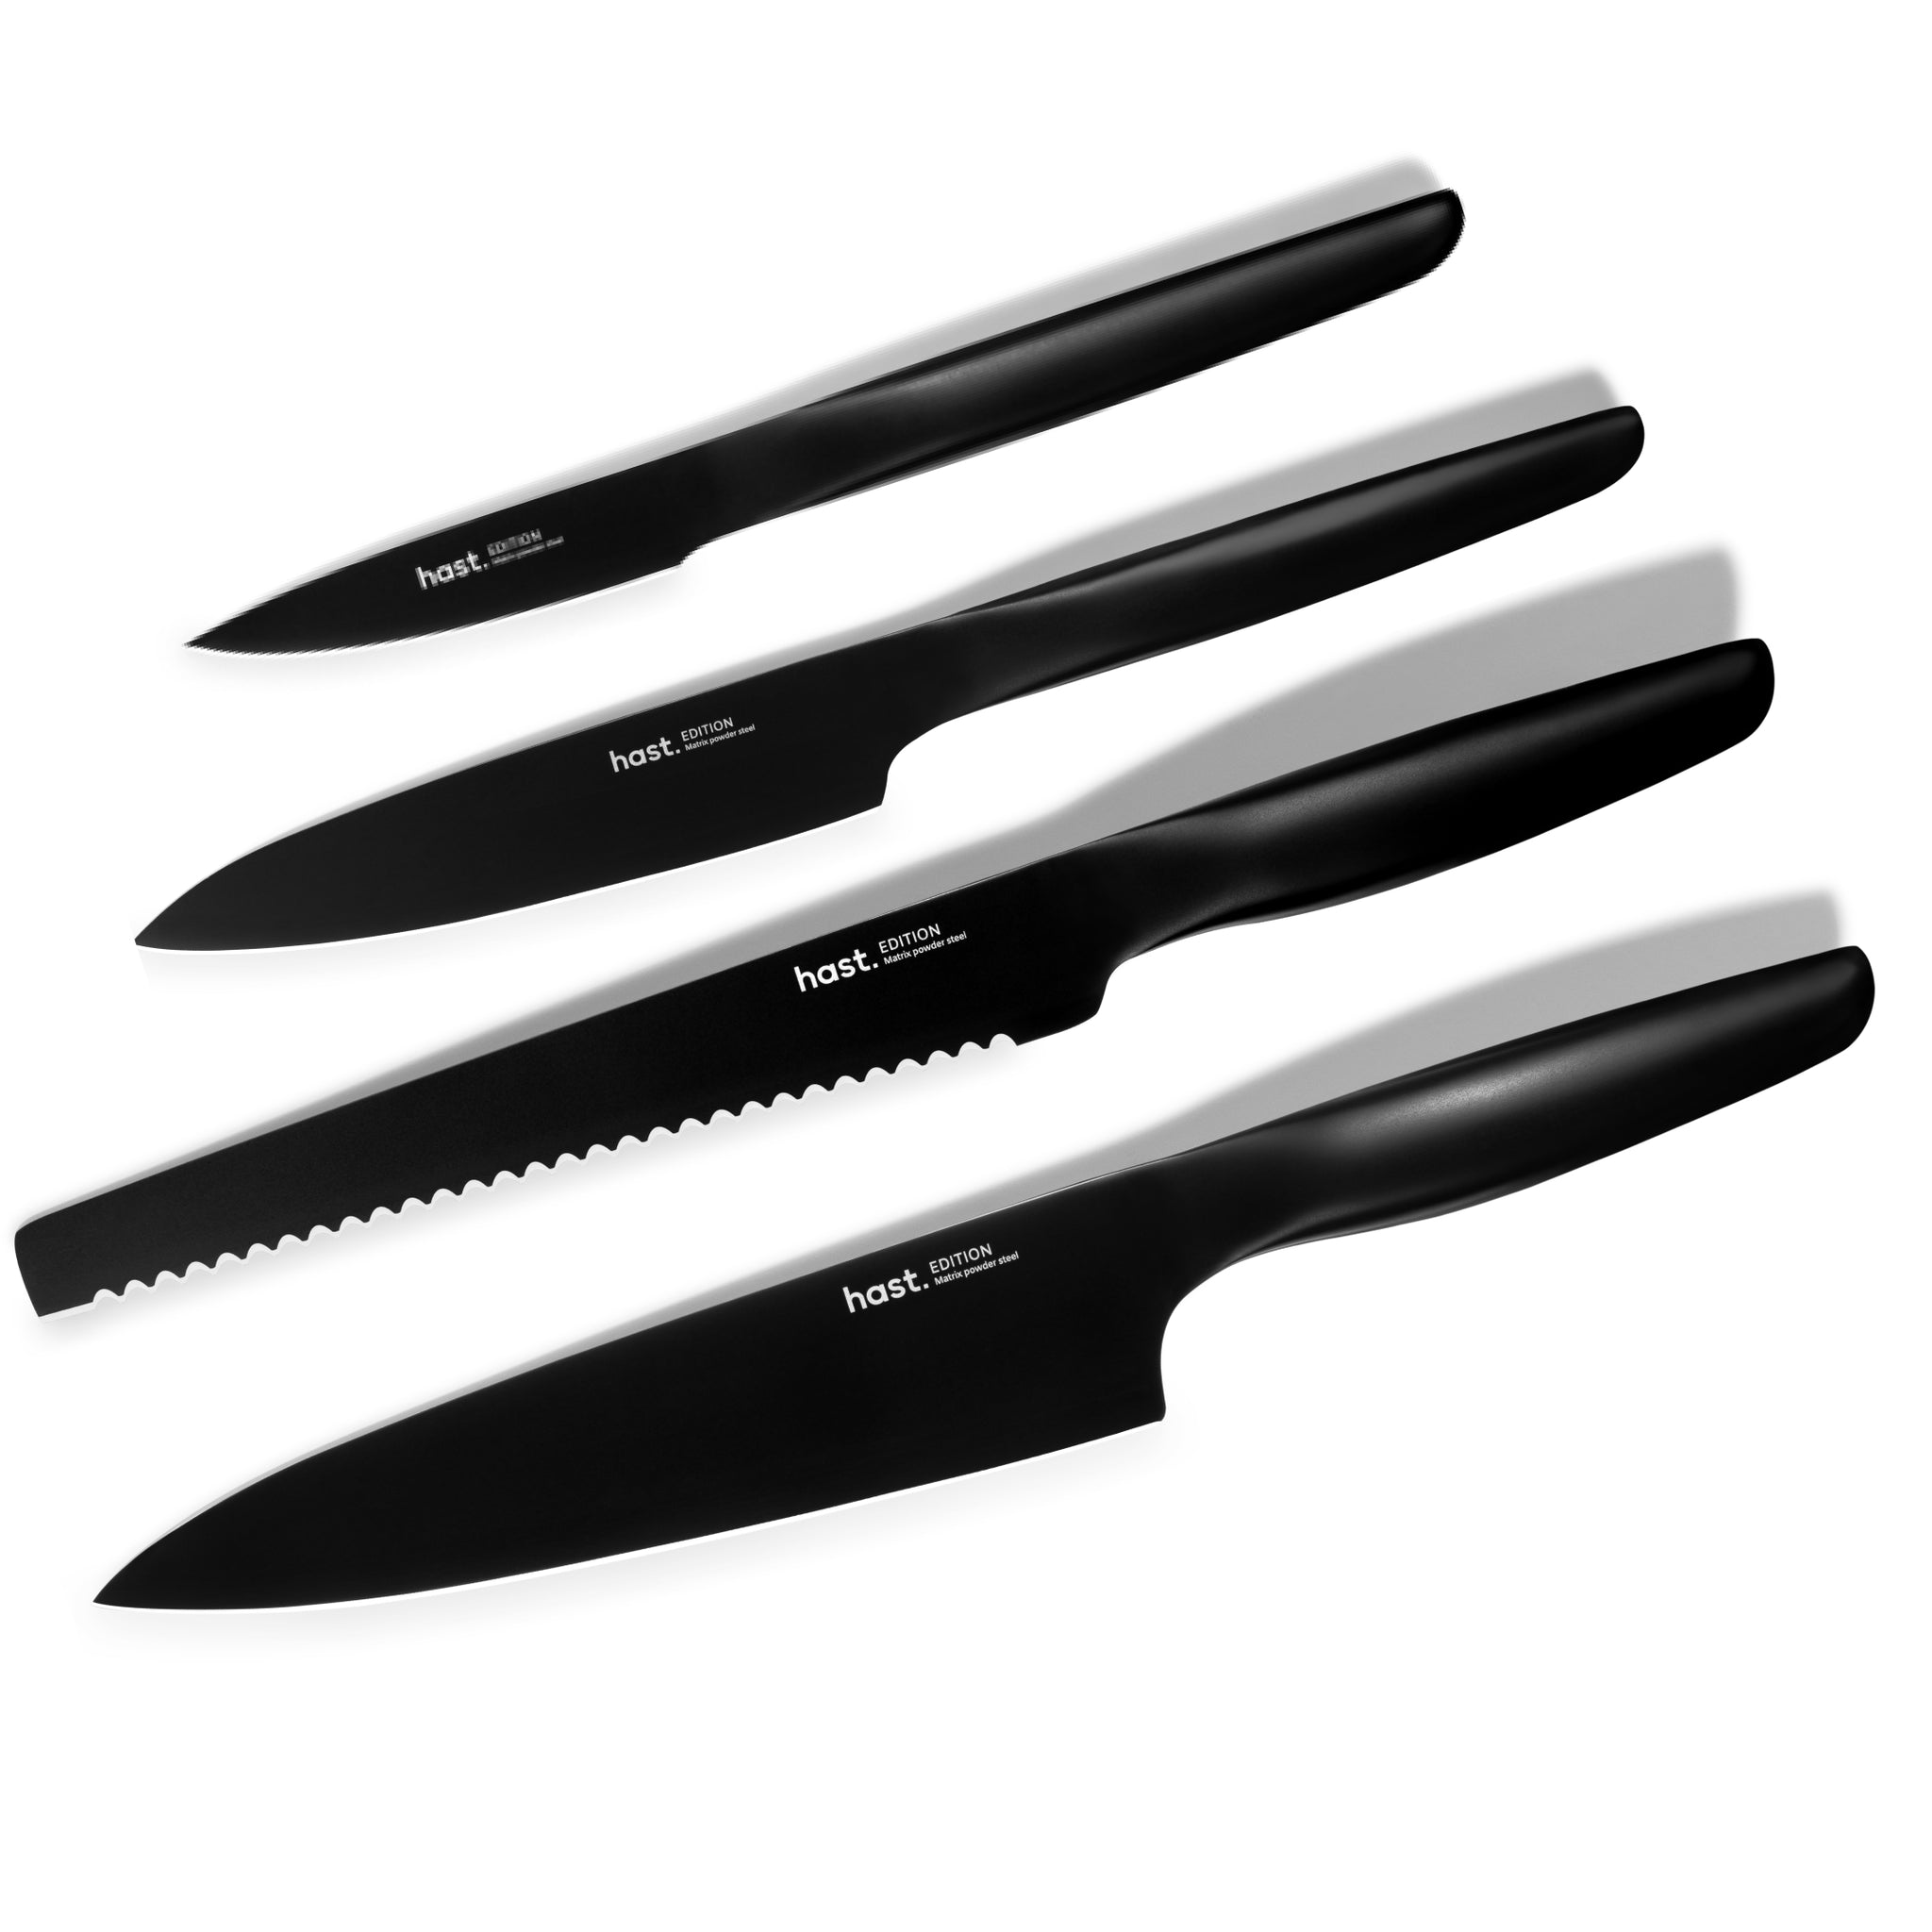 Image of 4P Modern Knife Set by Hast - Use code KED15 for 15% off